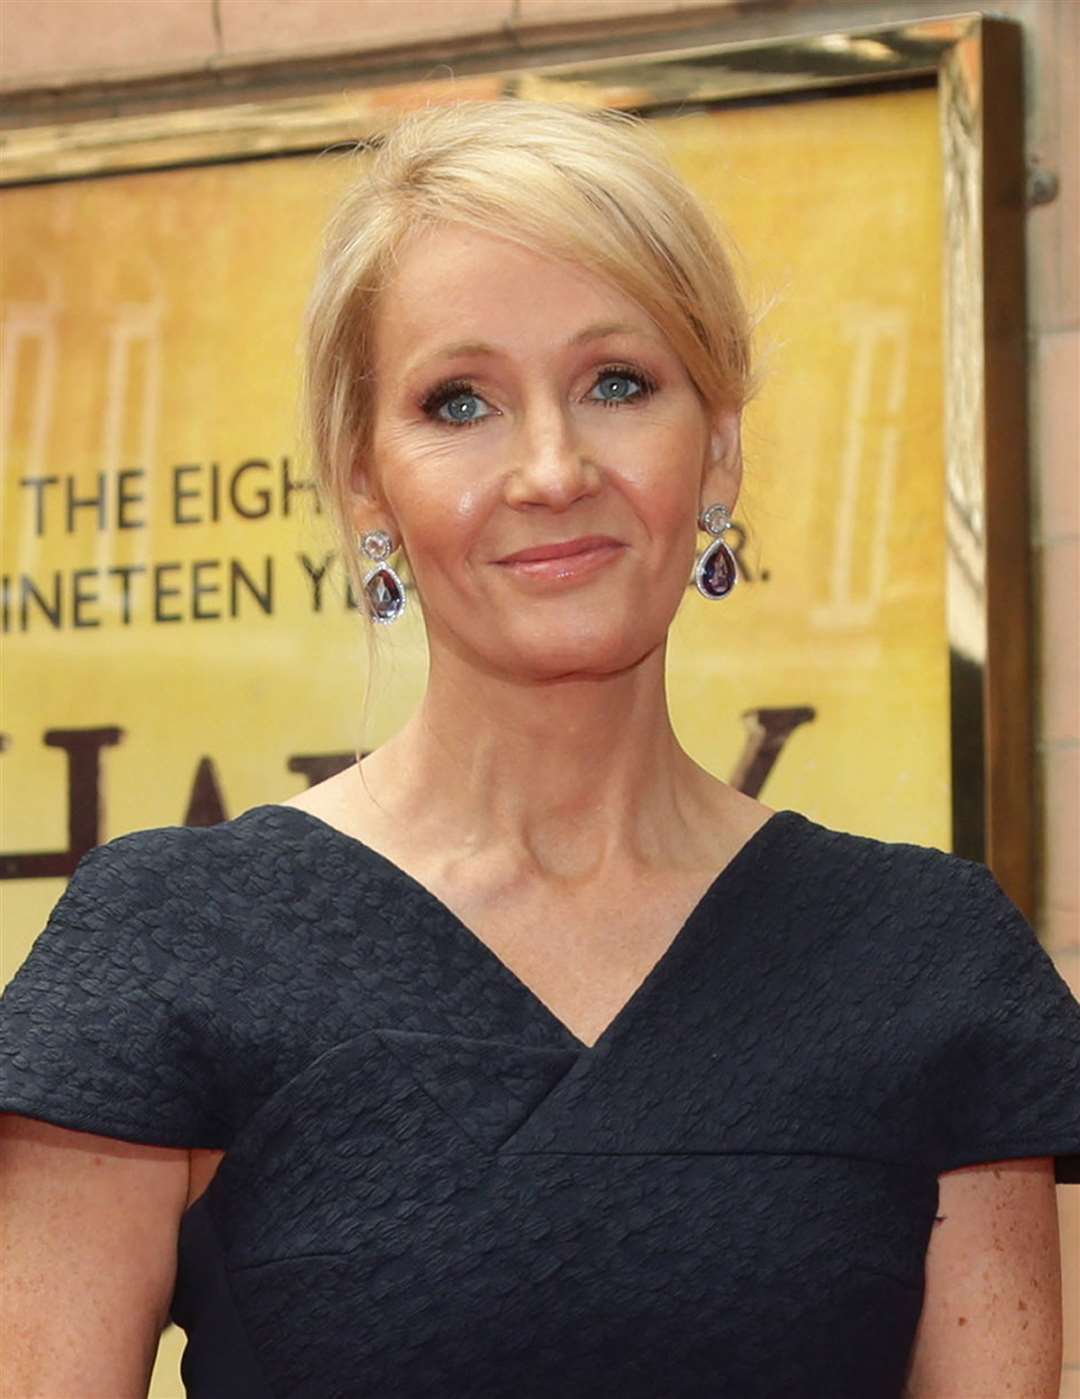 JK Rowling claimed she and others who have campaigned for biological women’s rights had been ‘abandoned’ by Labour (Yui Mok/PA)